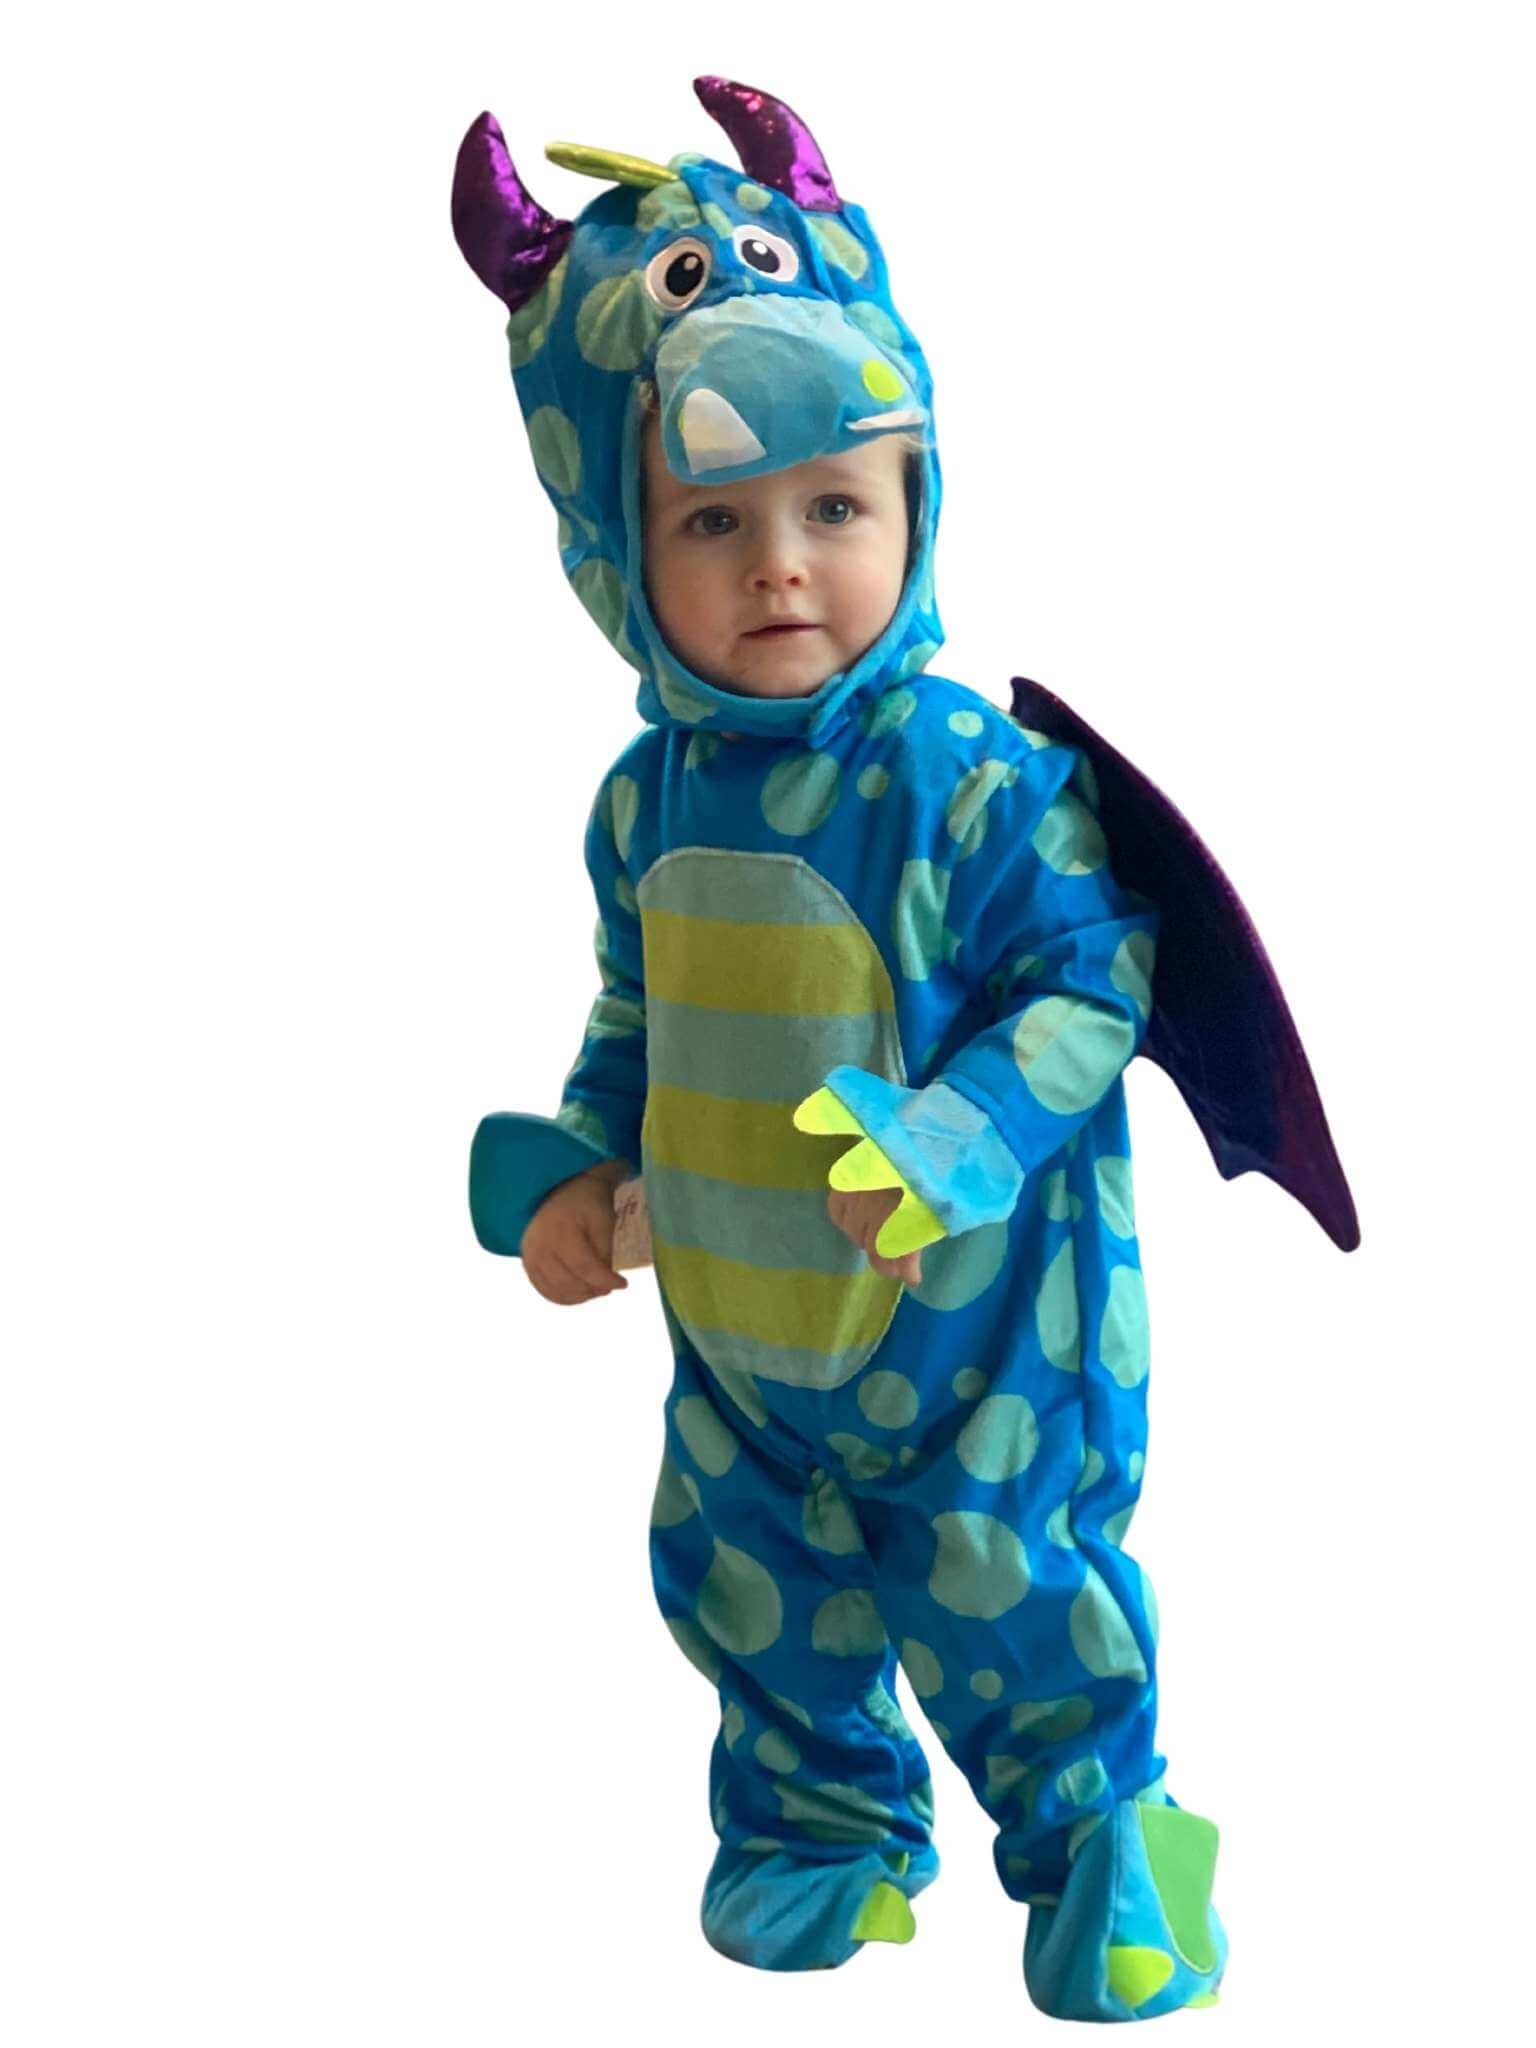 Toddler wearing blue and green dragon costume showing the padded dragon face hood and striped tummy.